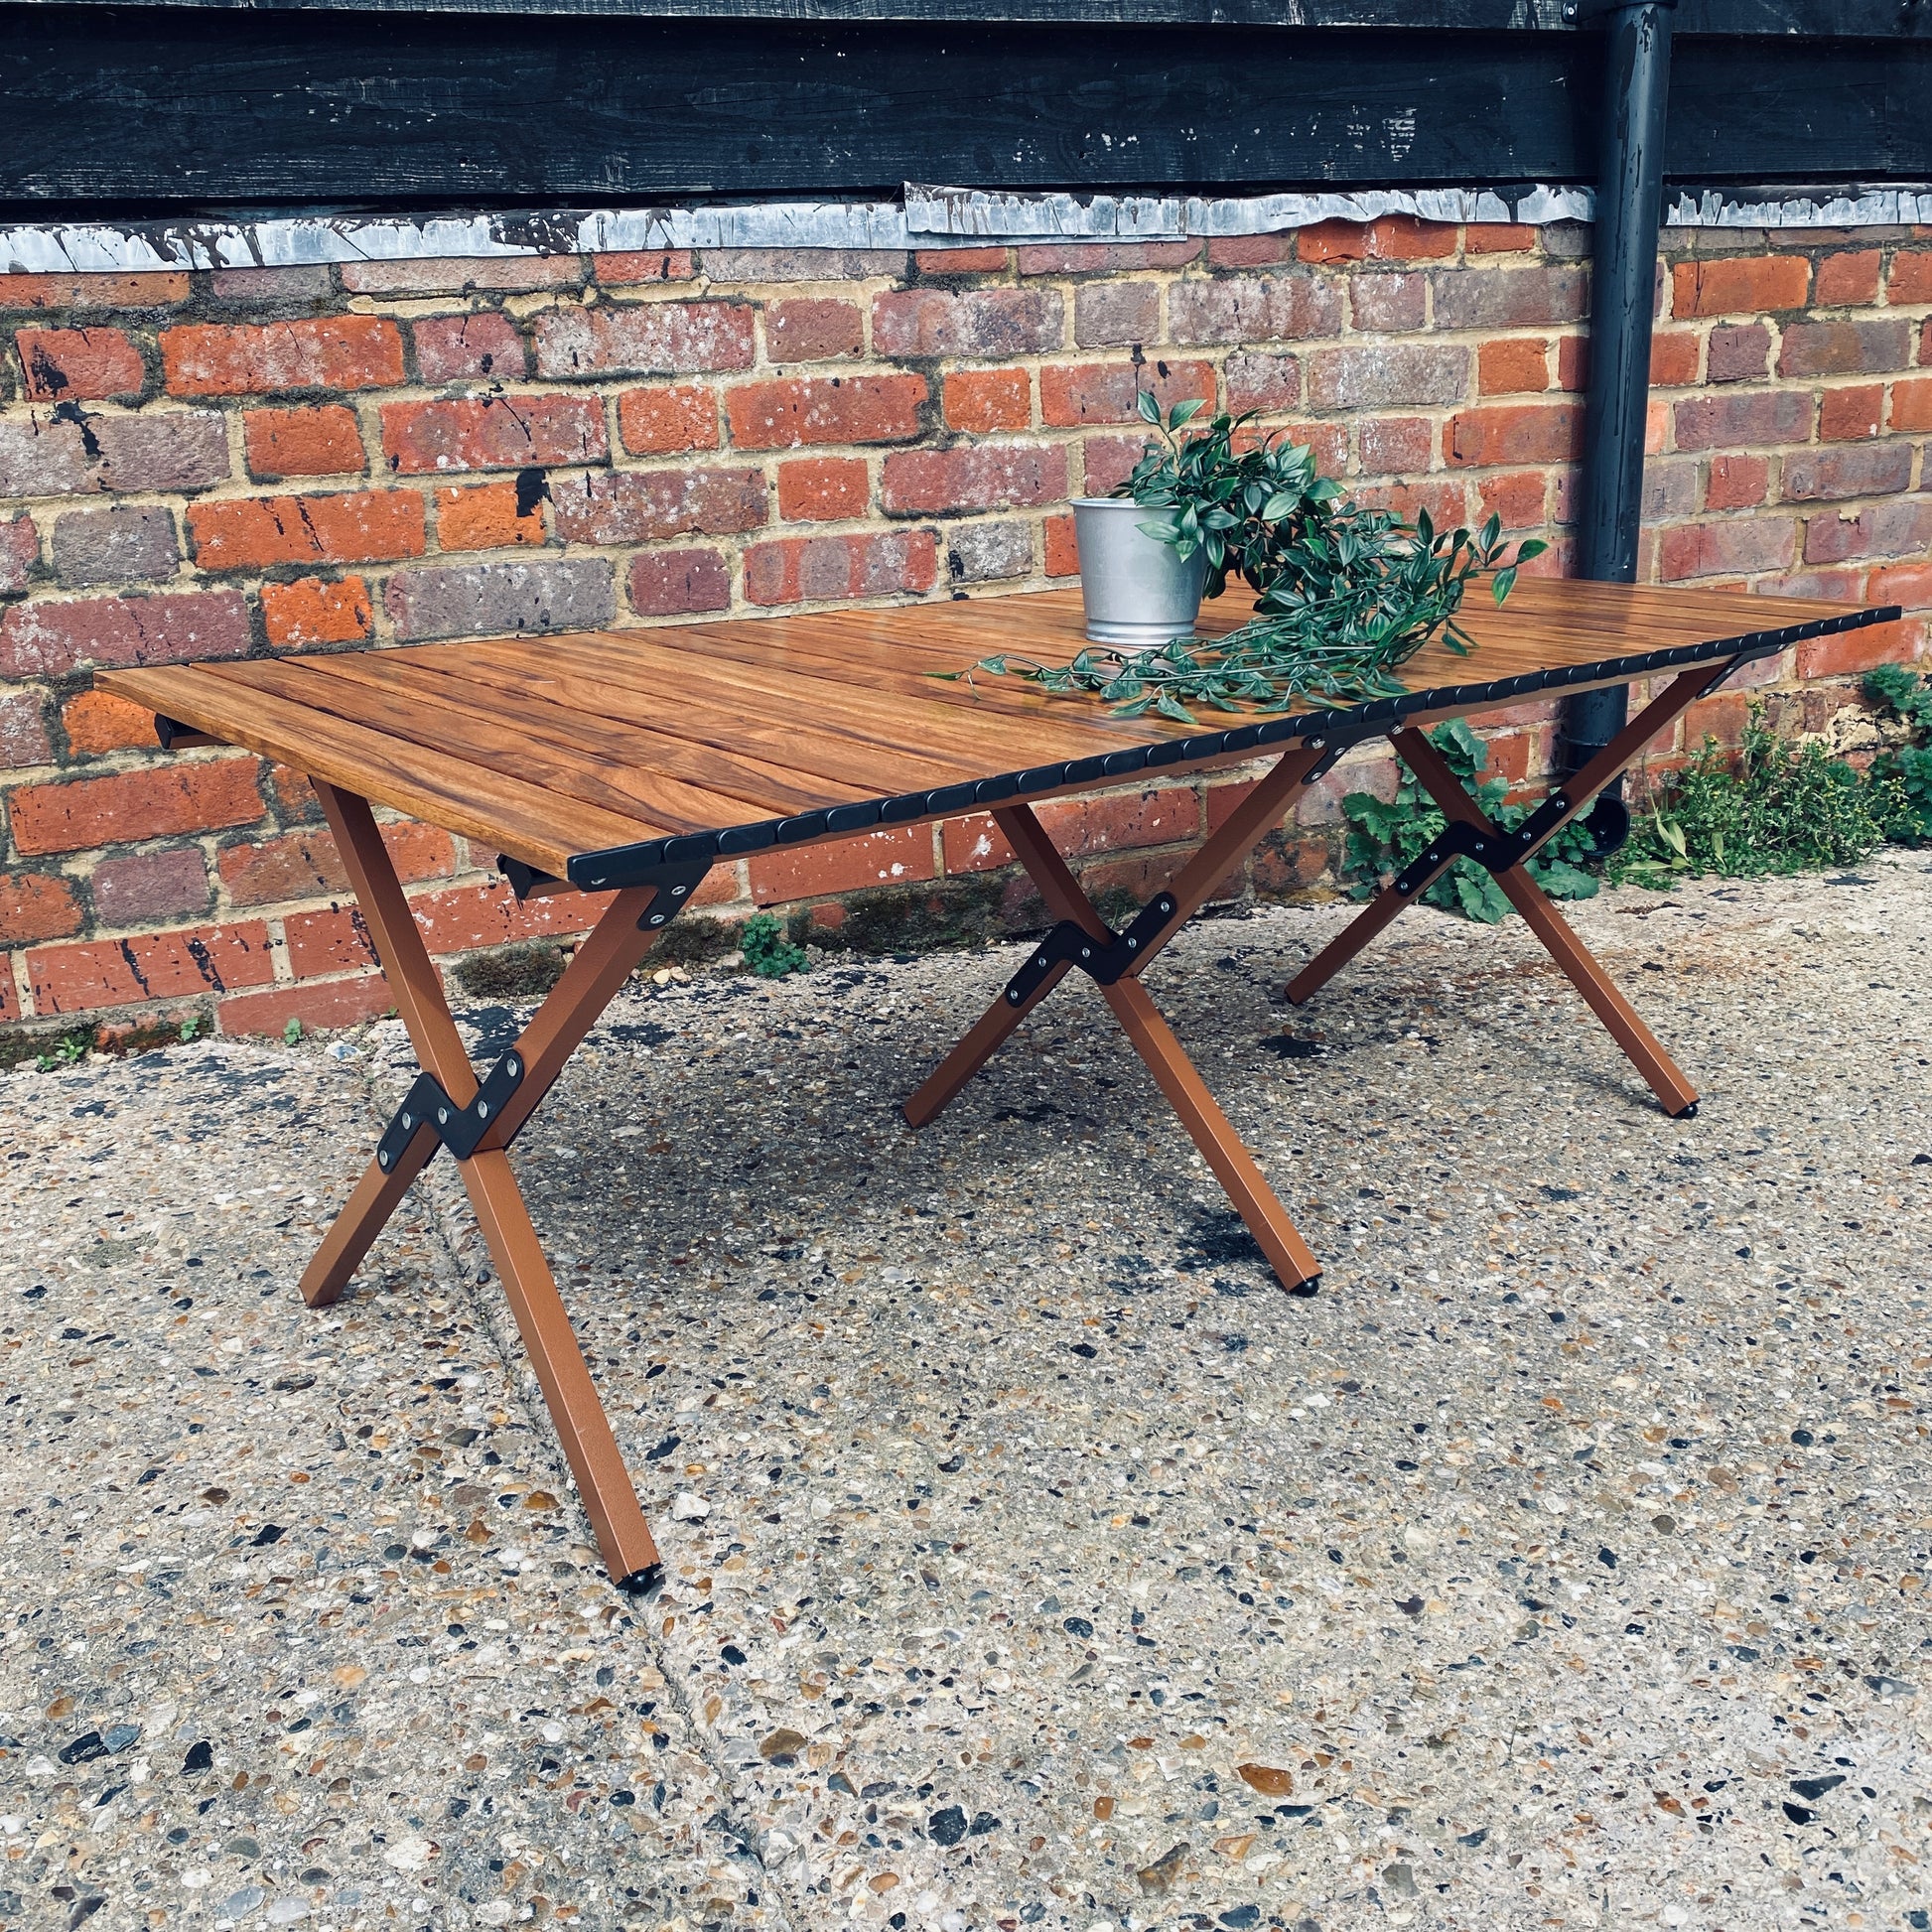 The Well Heeled Hippy's foldable, portable, stylish outdoor picnic table - perfect for patios, beach parties and camping